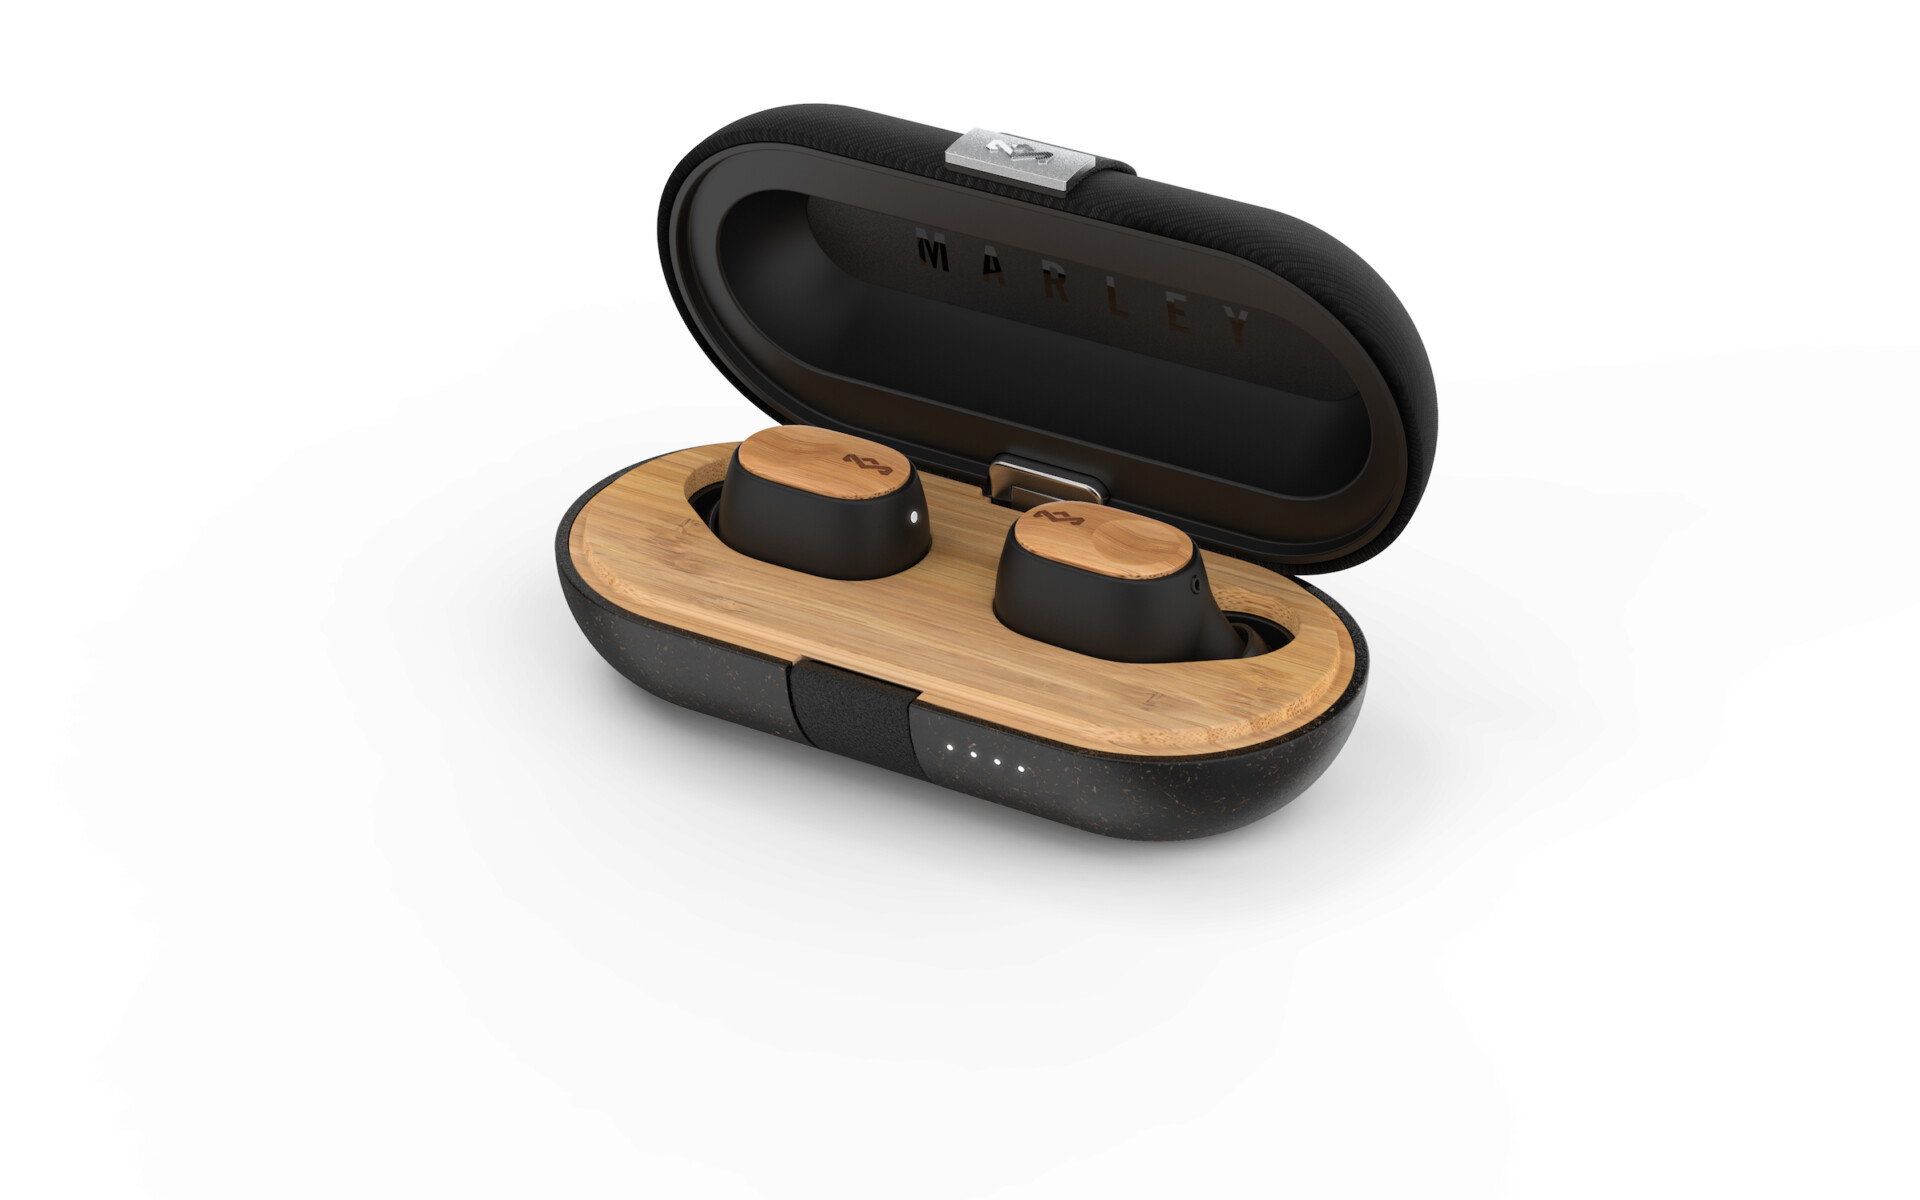 House of House of House of House of House of Marley Liberate Air true wireless earbuds in charging case on white background.